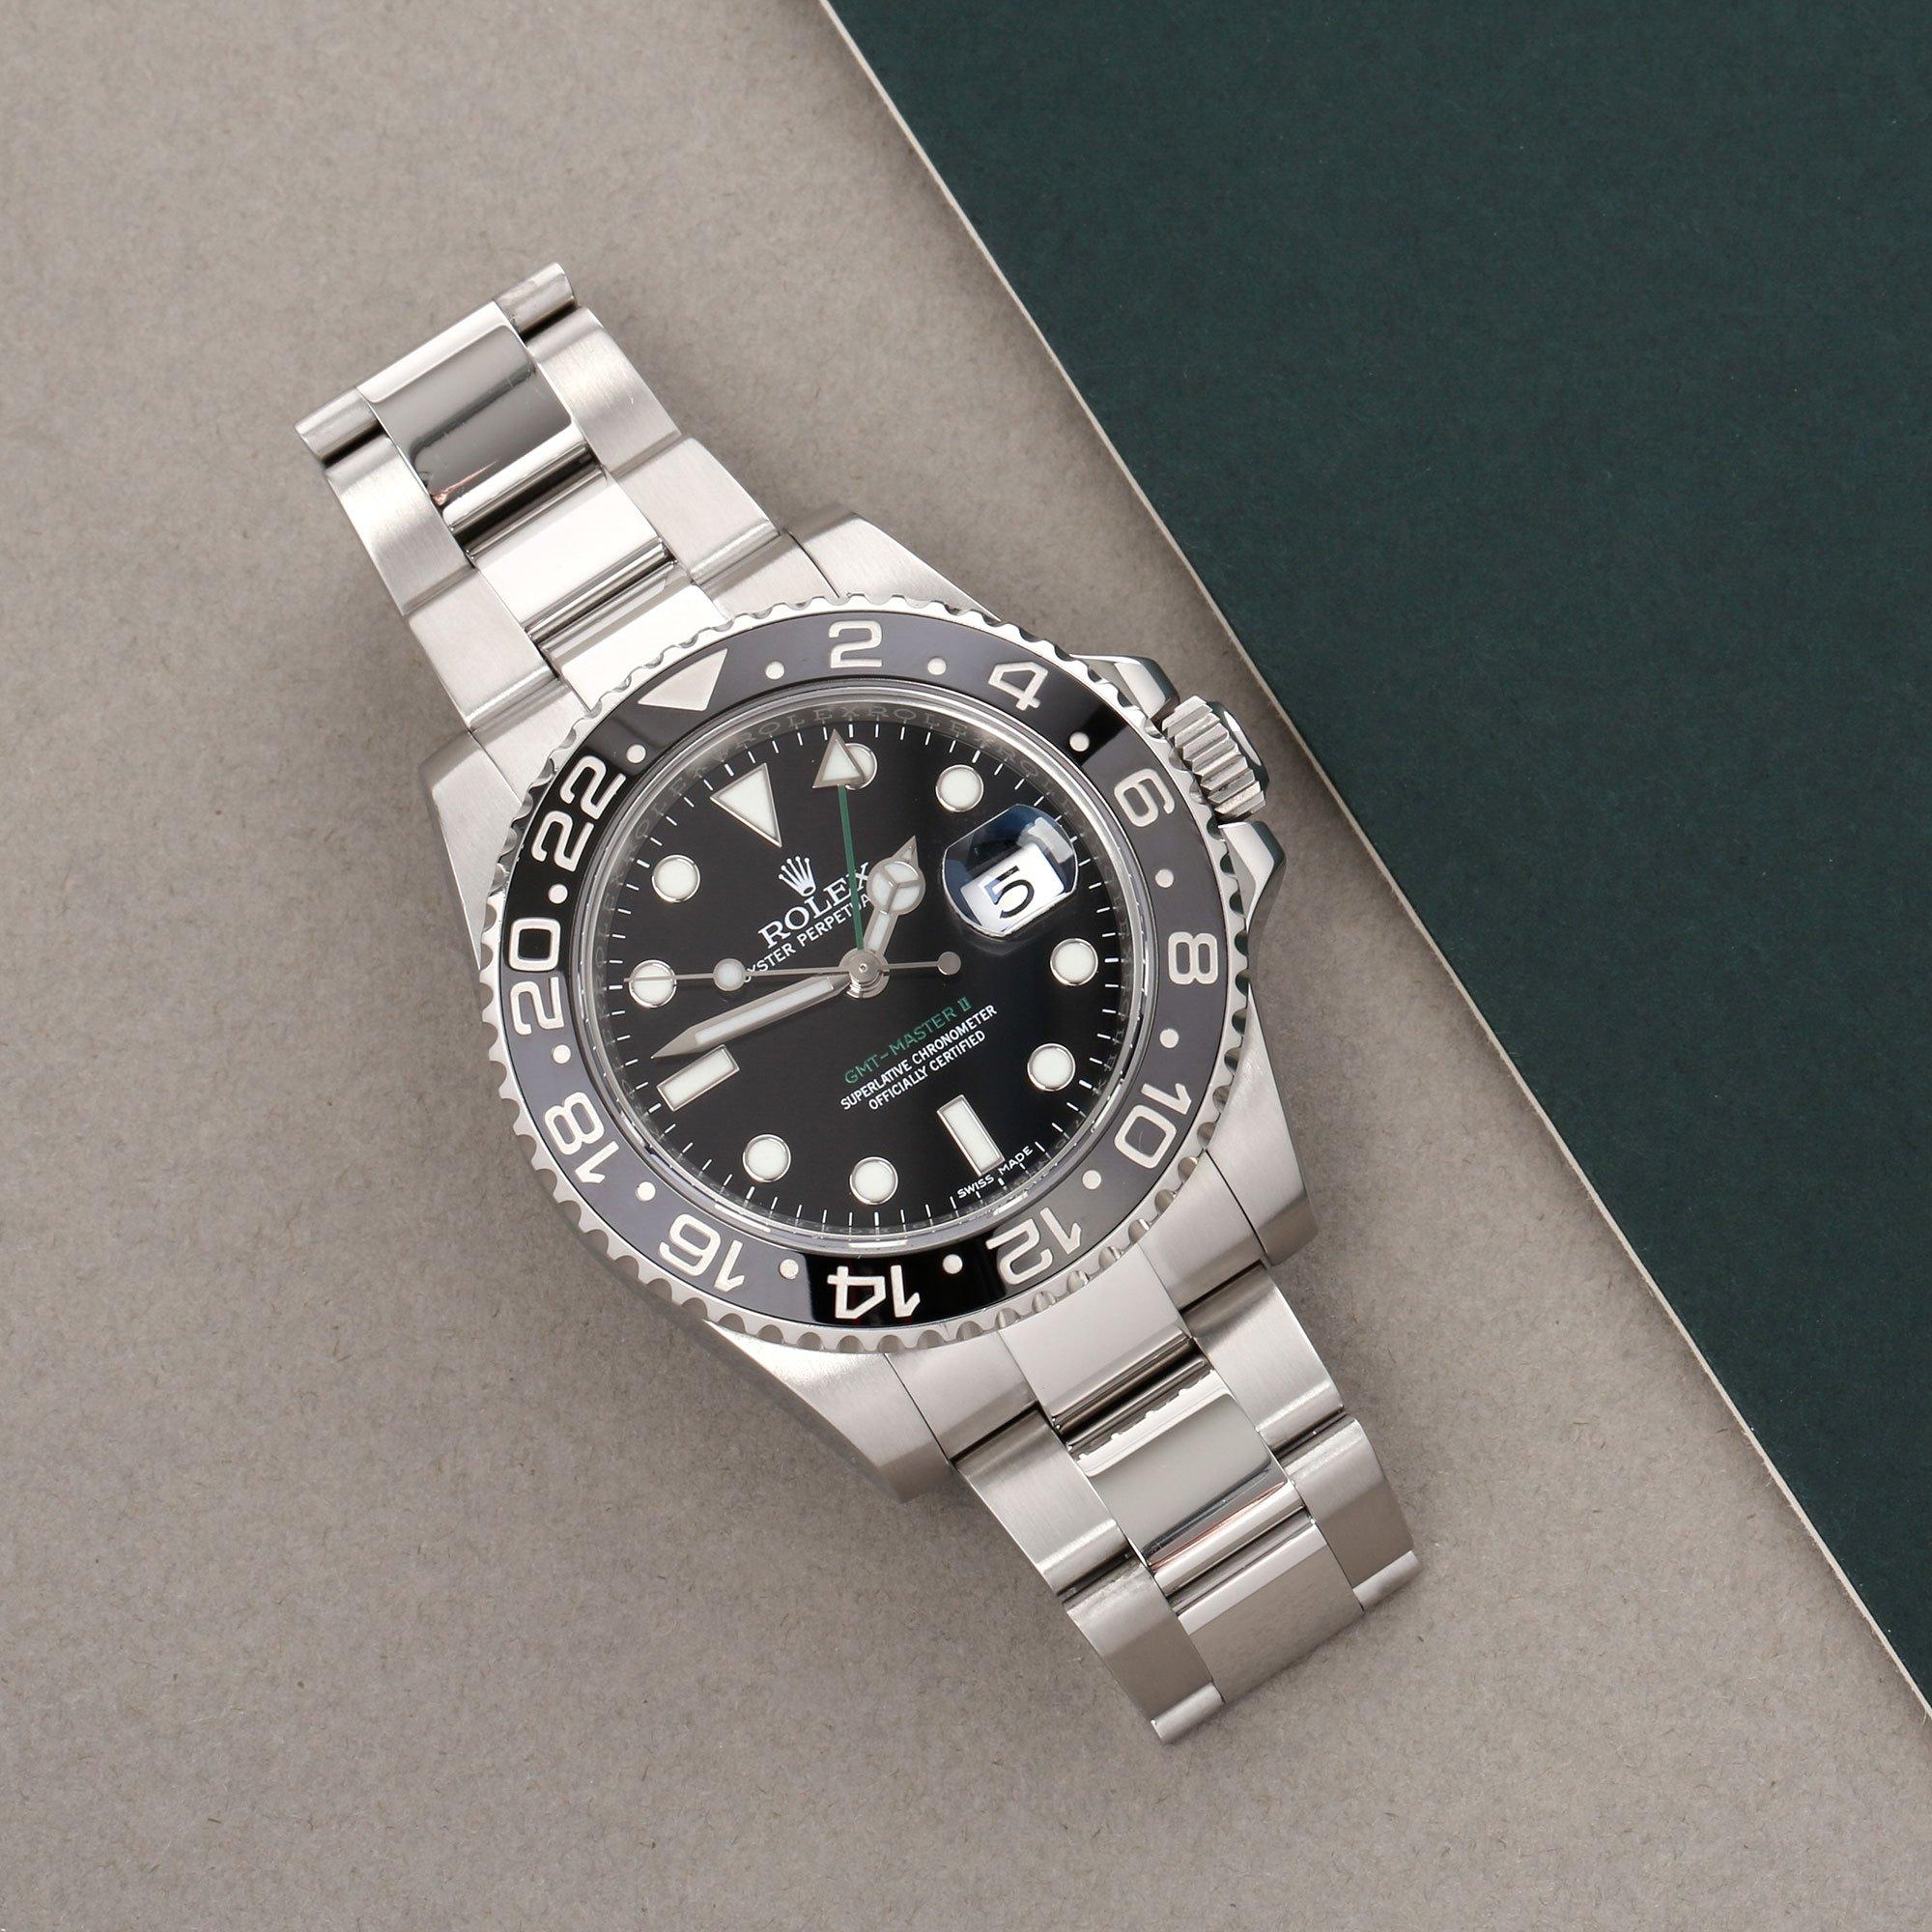 Xupes Reference: COM002717
Manufacturer: Rolex
Model: GMT-Master II
Model Variant: 0
Model Number: 116710
Age: 2017
Gender: Men
Complete With: Xupes Presentation Box
Dial: Black Baton 
Glass: Sapphire Crystal
Case Material: Stainless Steel
Strap